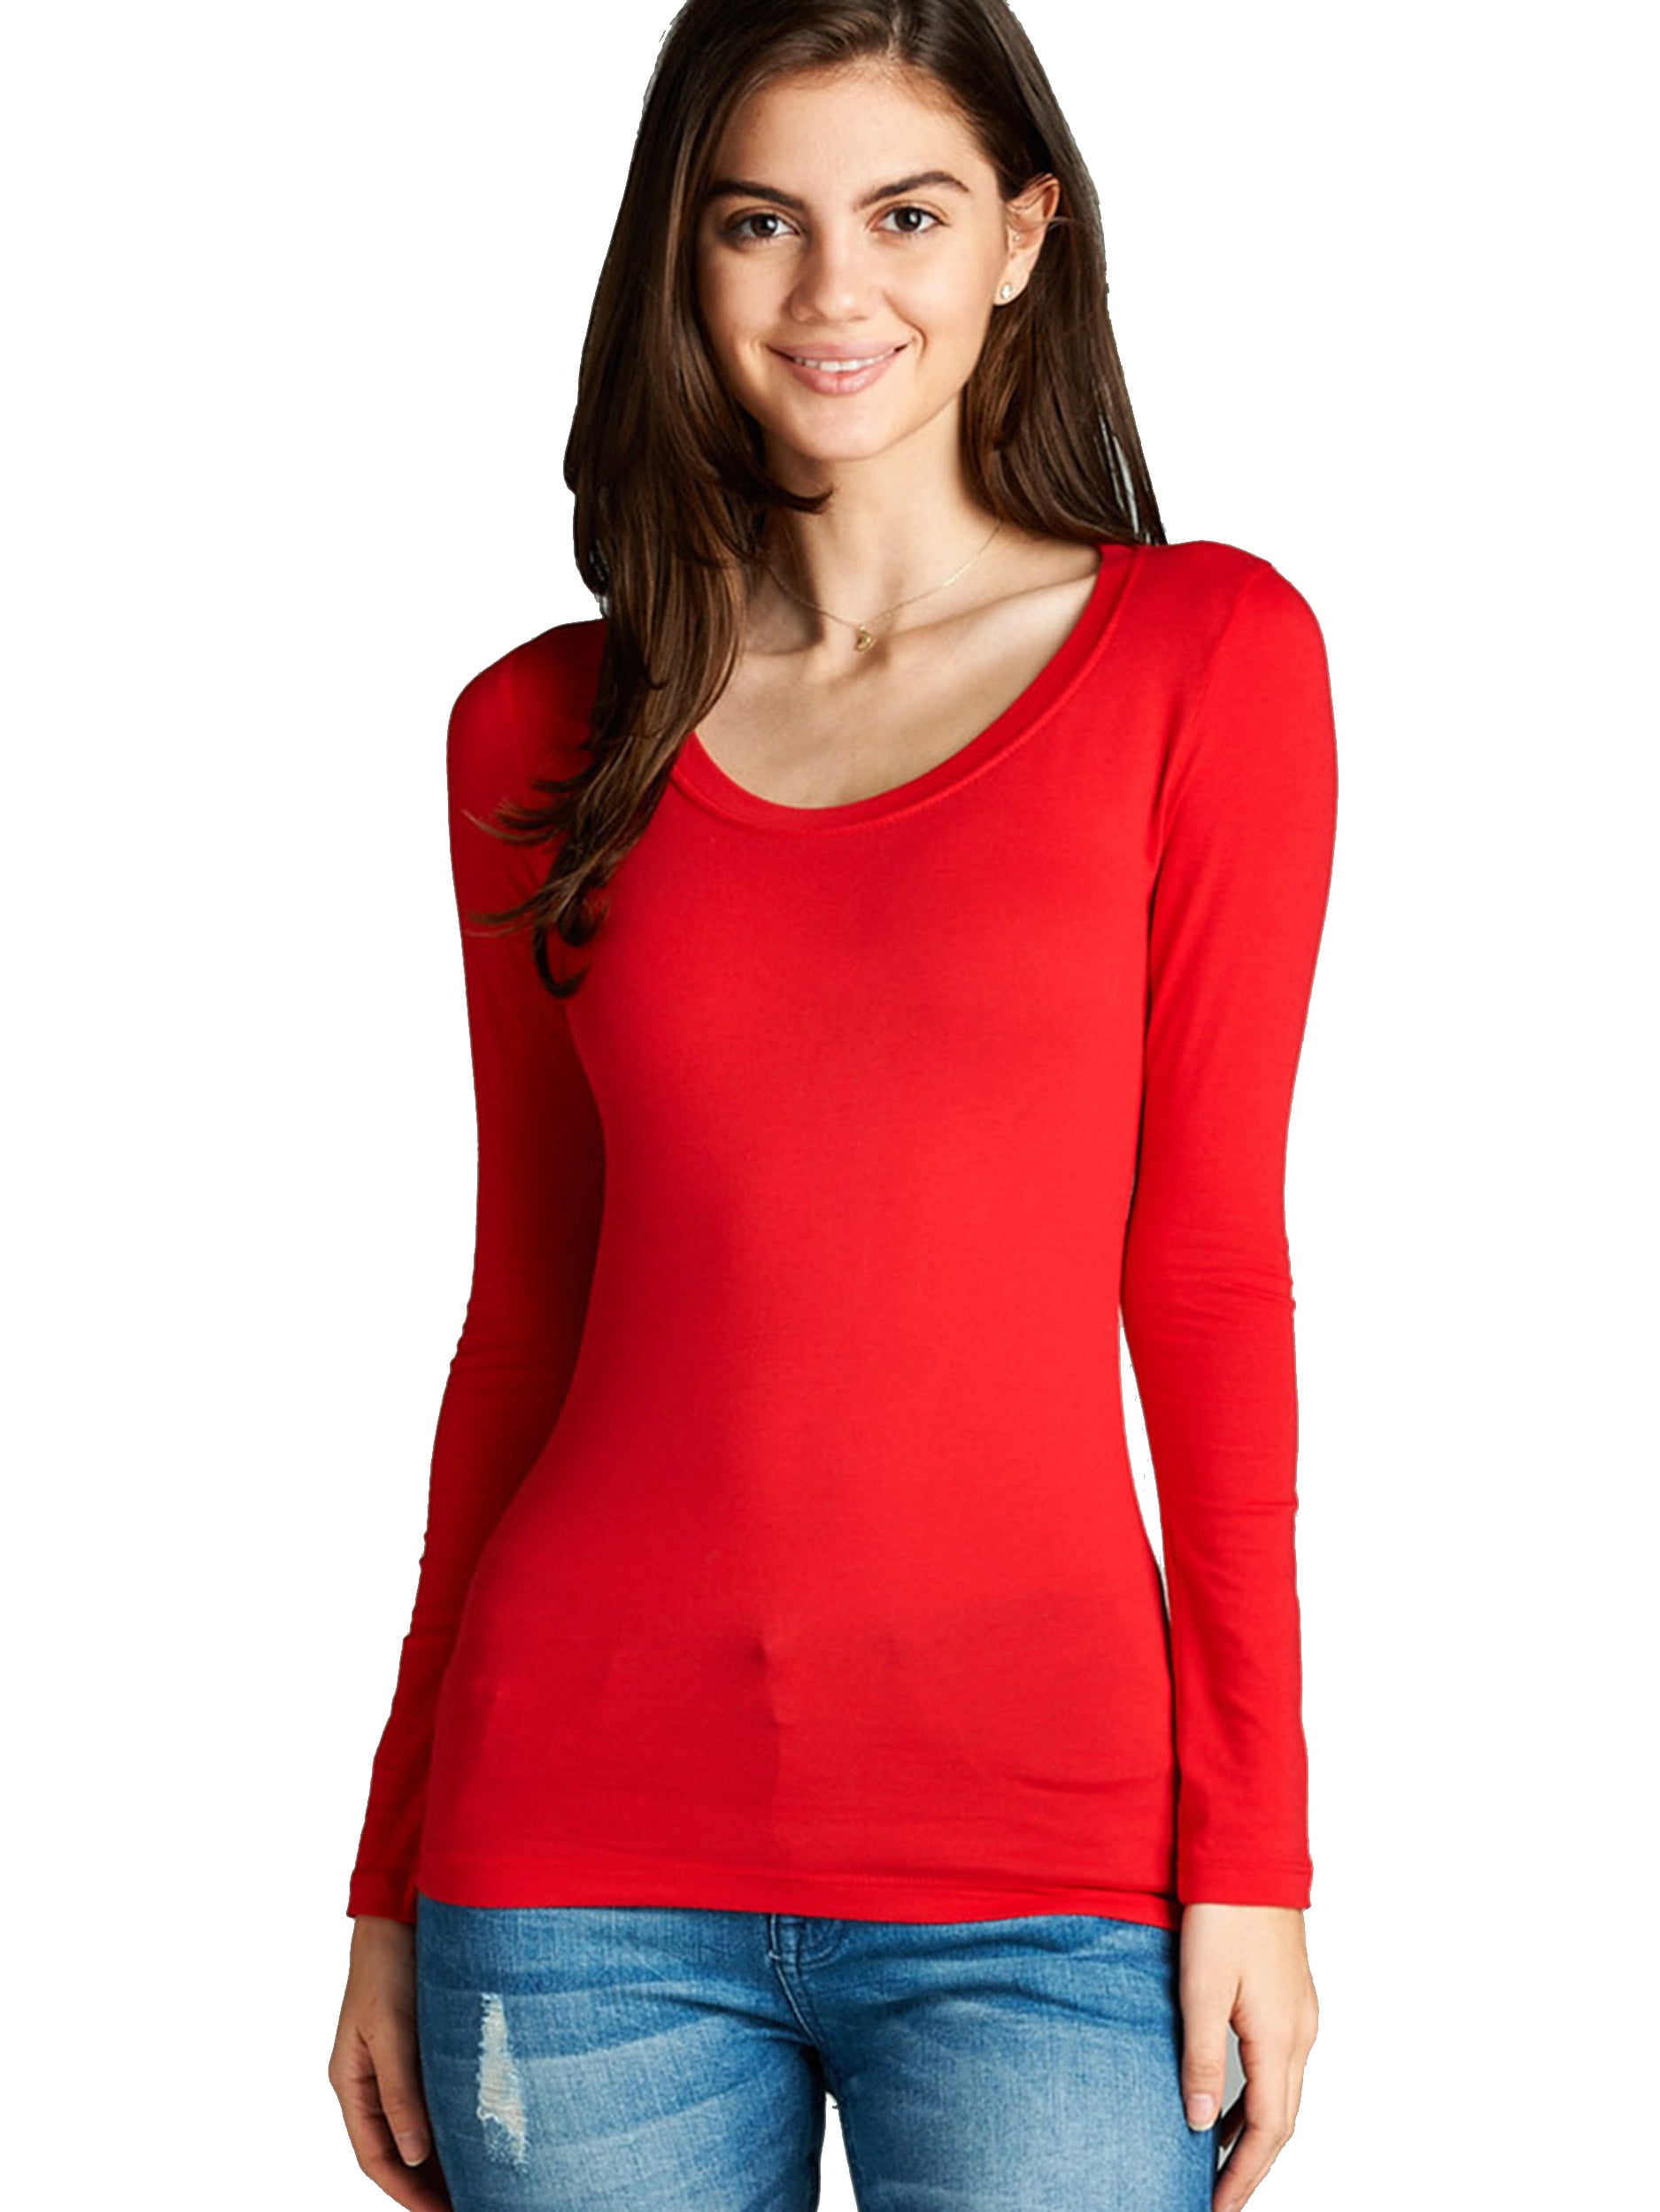 Women's Long Sleeve Scoop Neck Fitted Cotton Top Basic T Shirts-Plus